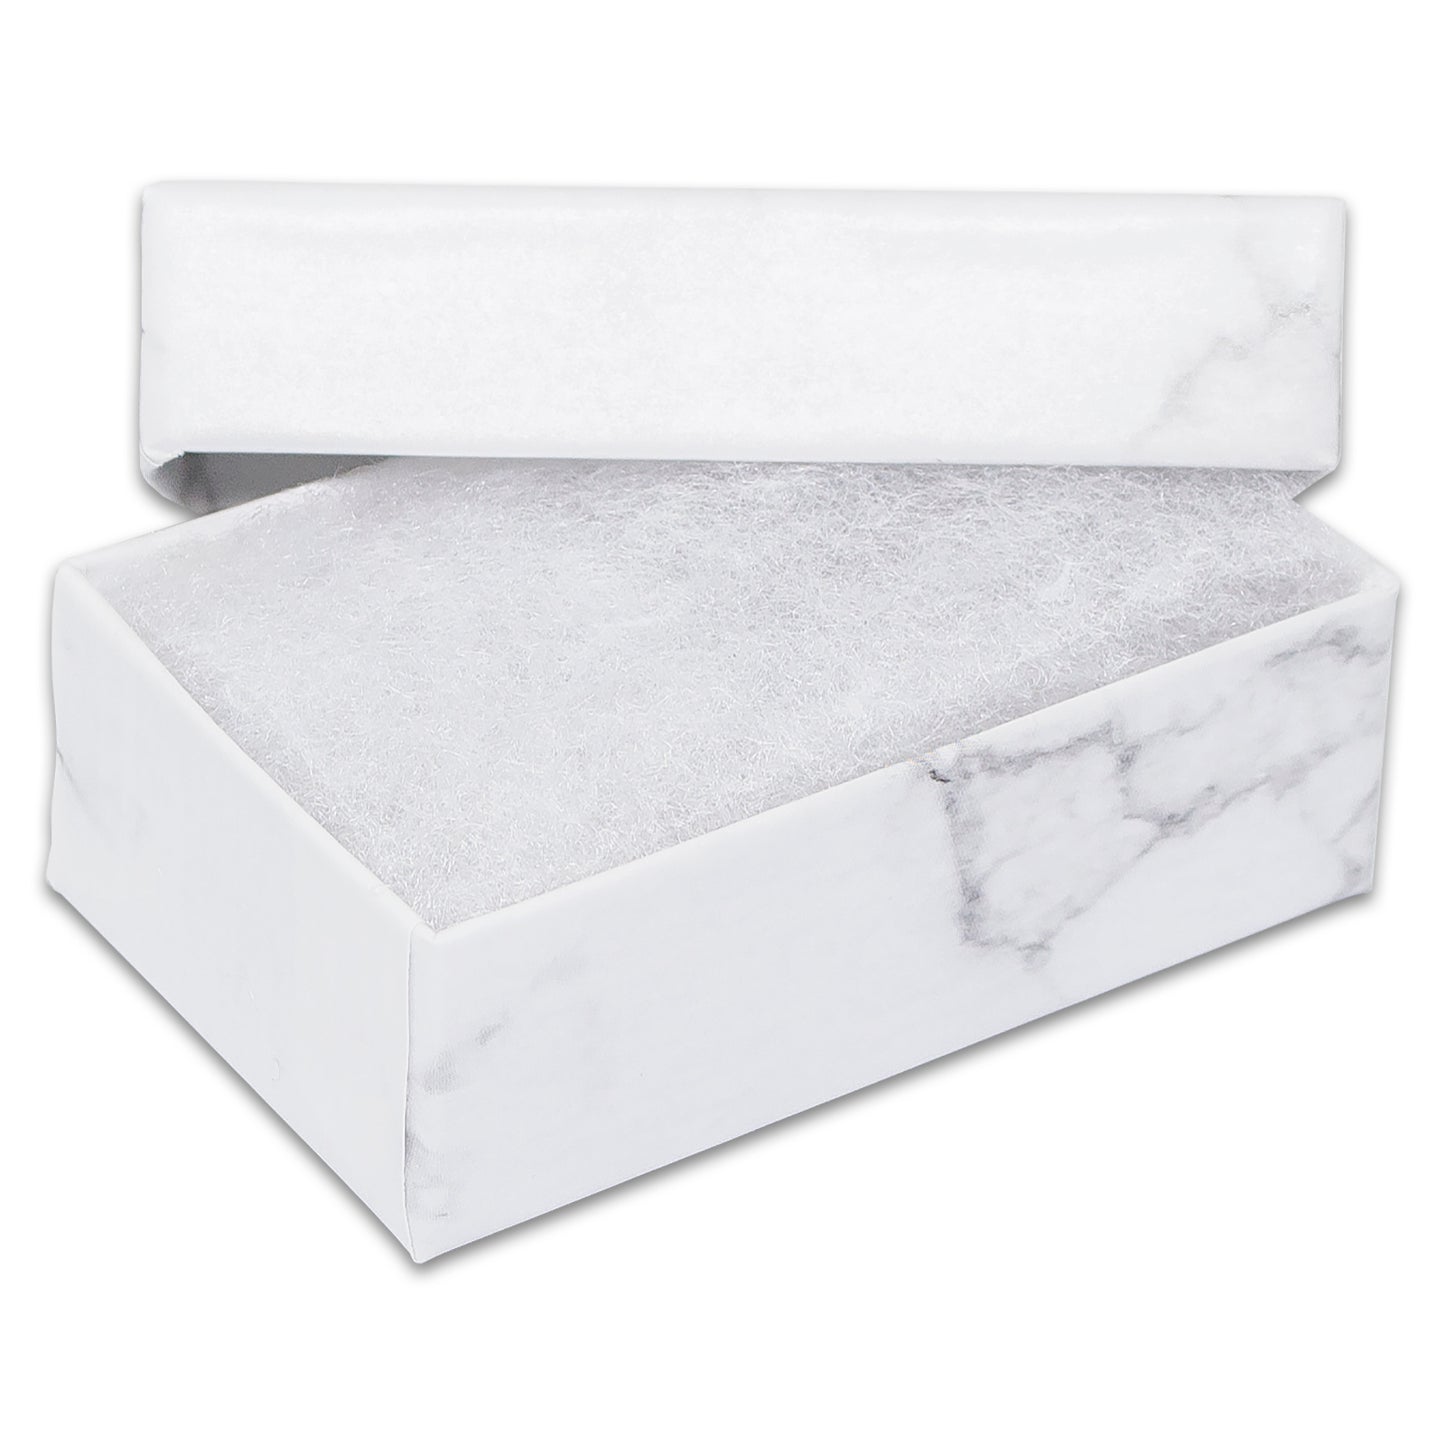 2 5/8" x 1 5/8" x 1" Marble White Cotton Filled Paper Box